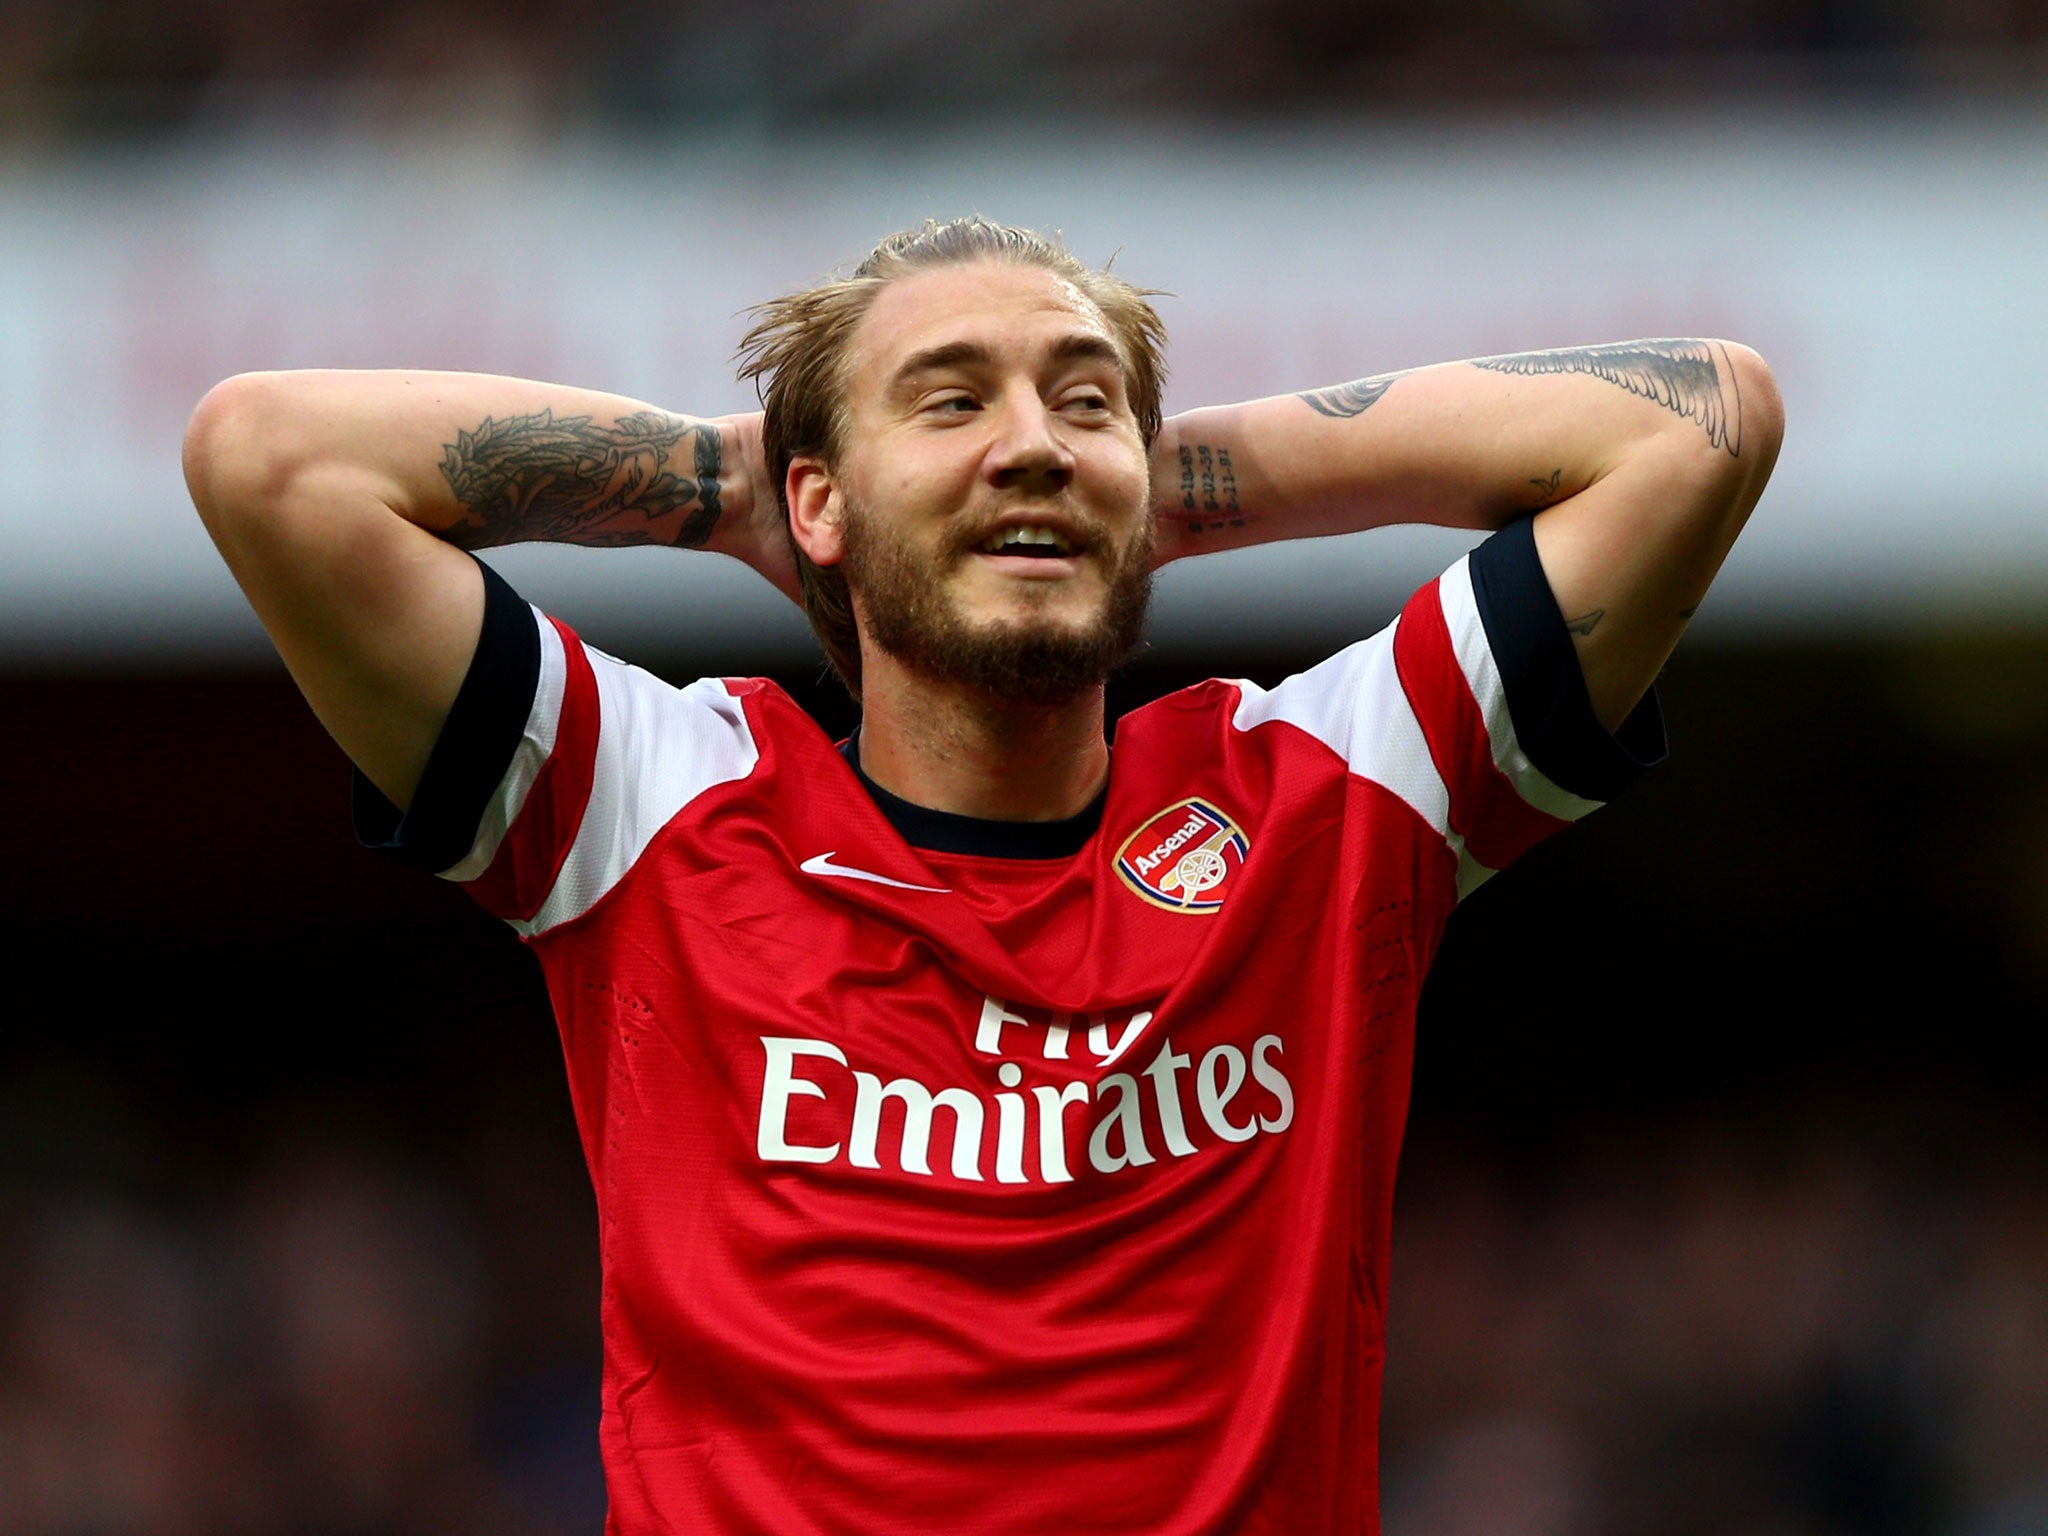 Nicklas Bendtner has been accused of a drunken rant at a taxi driver in Denmark